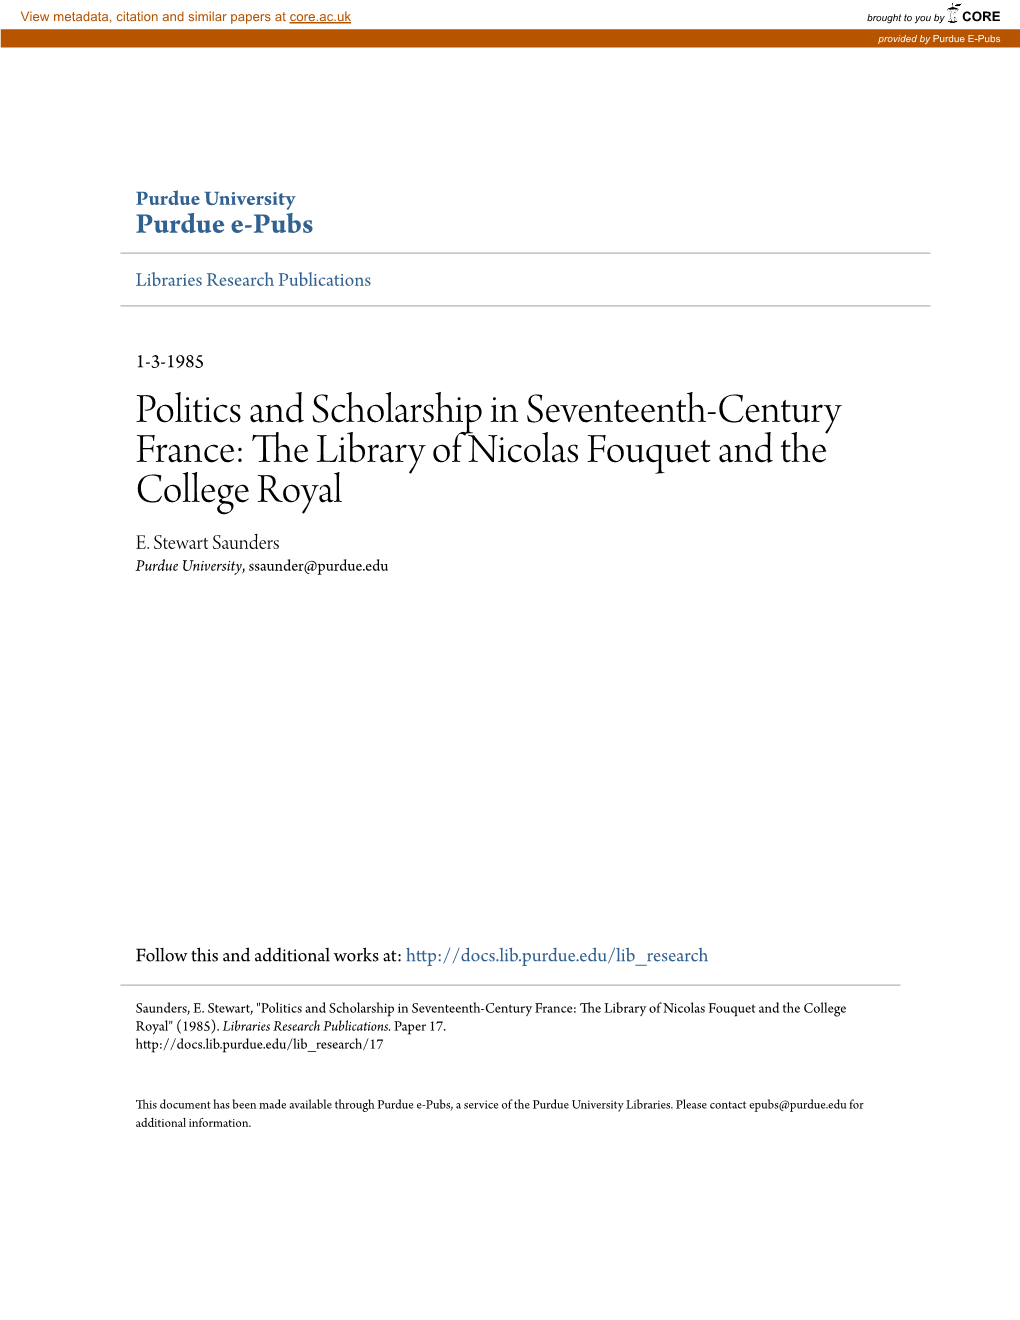 Politics and Scholarship in Seventeenth-Century France: the Library of Nicolas Fouquet and the College Royal E